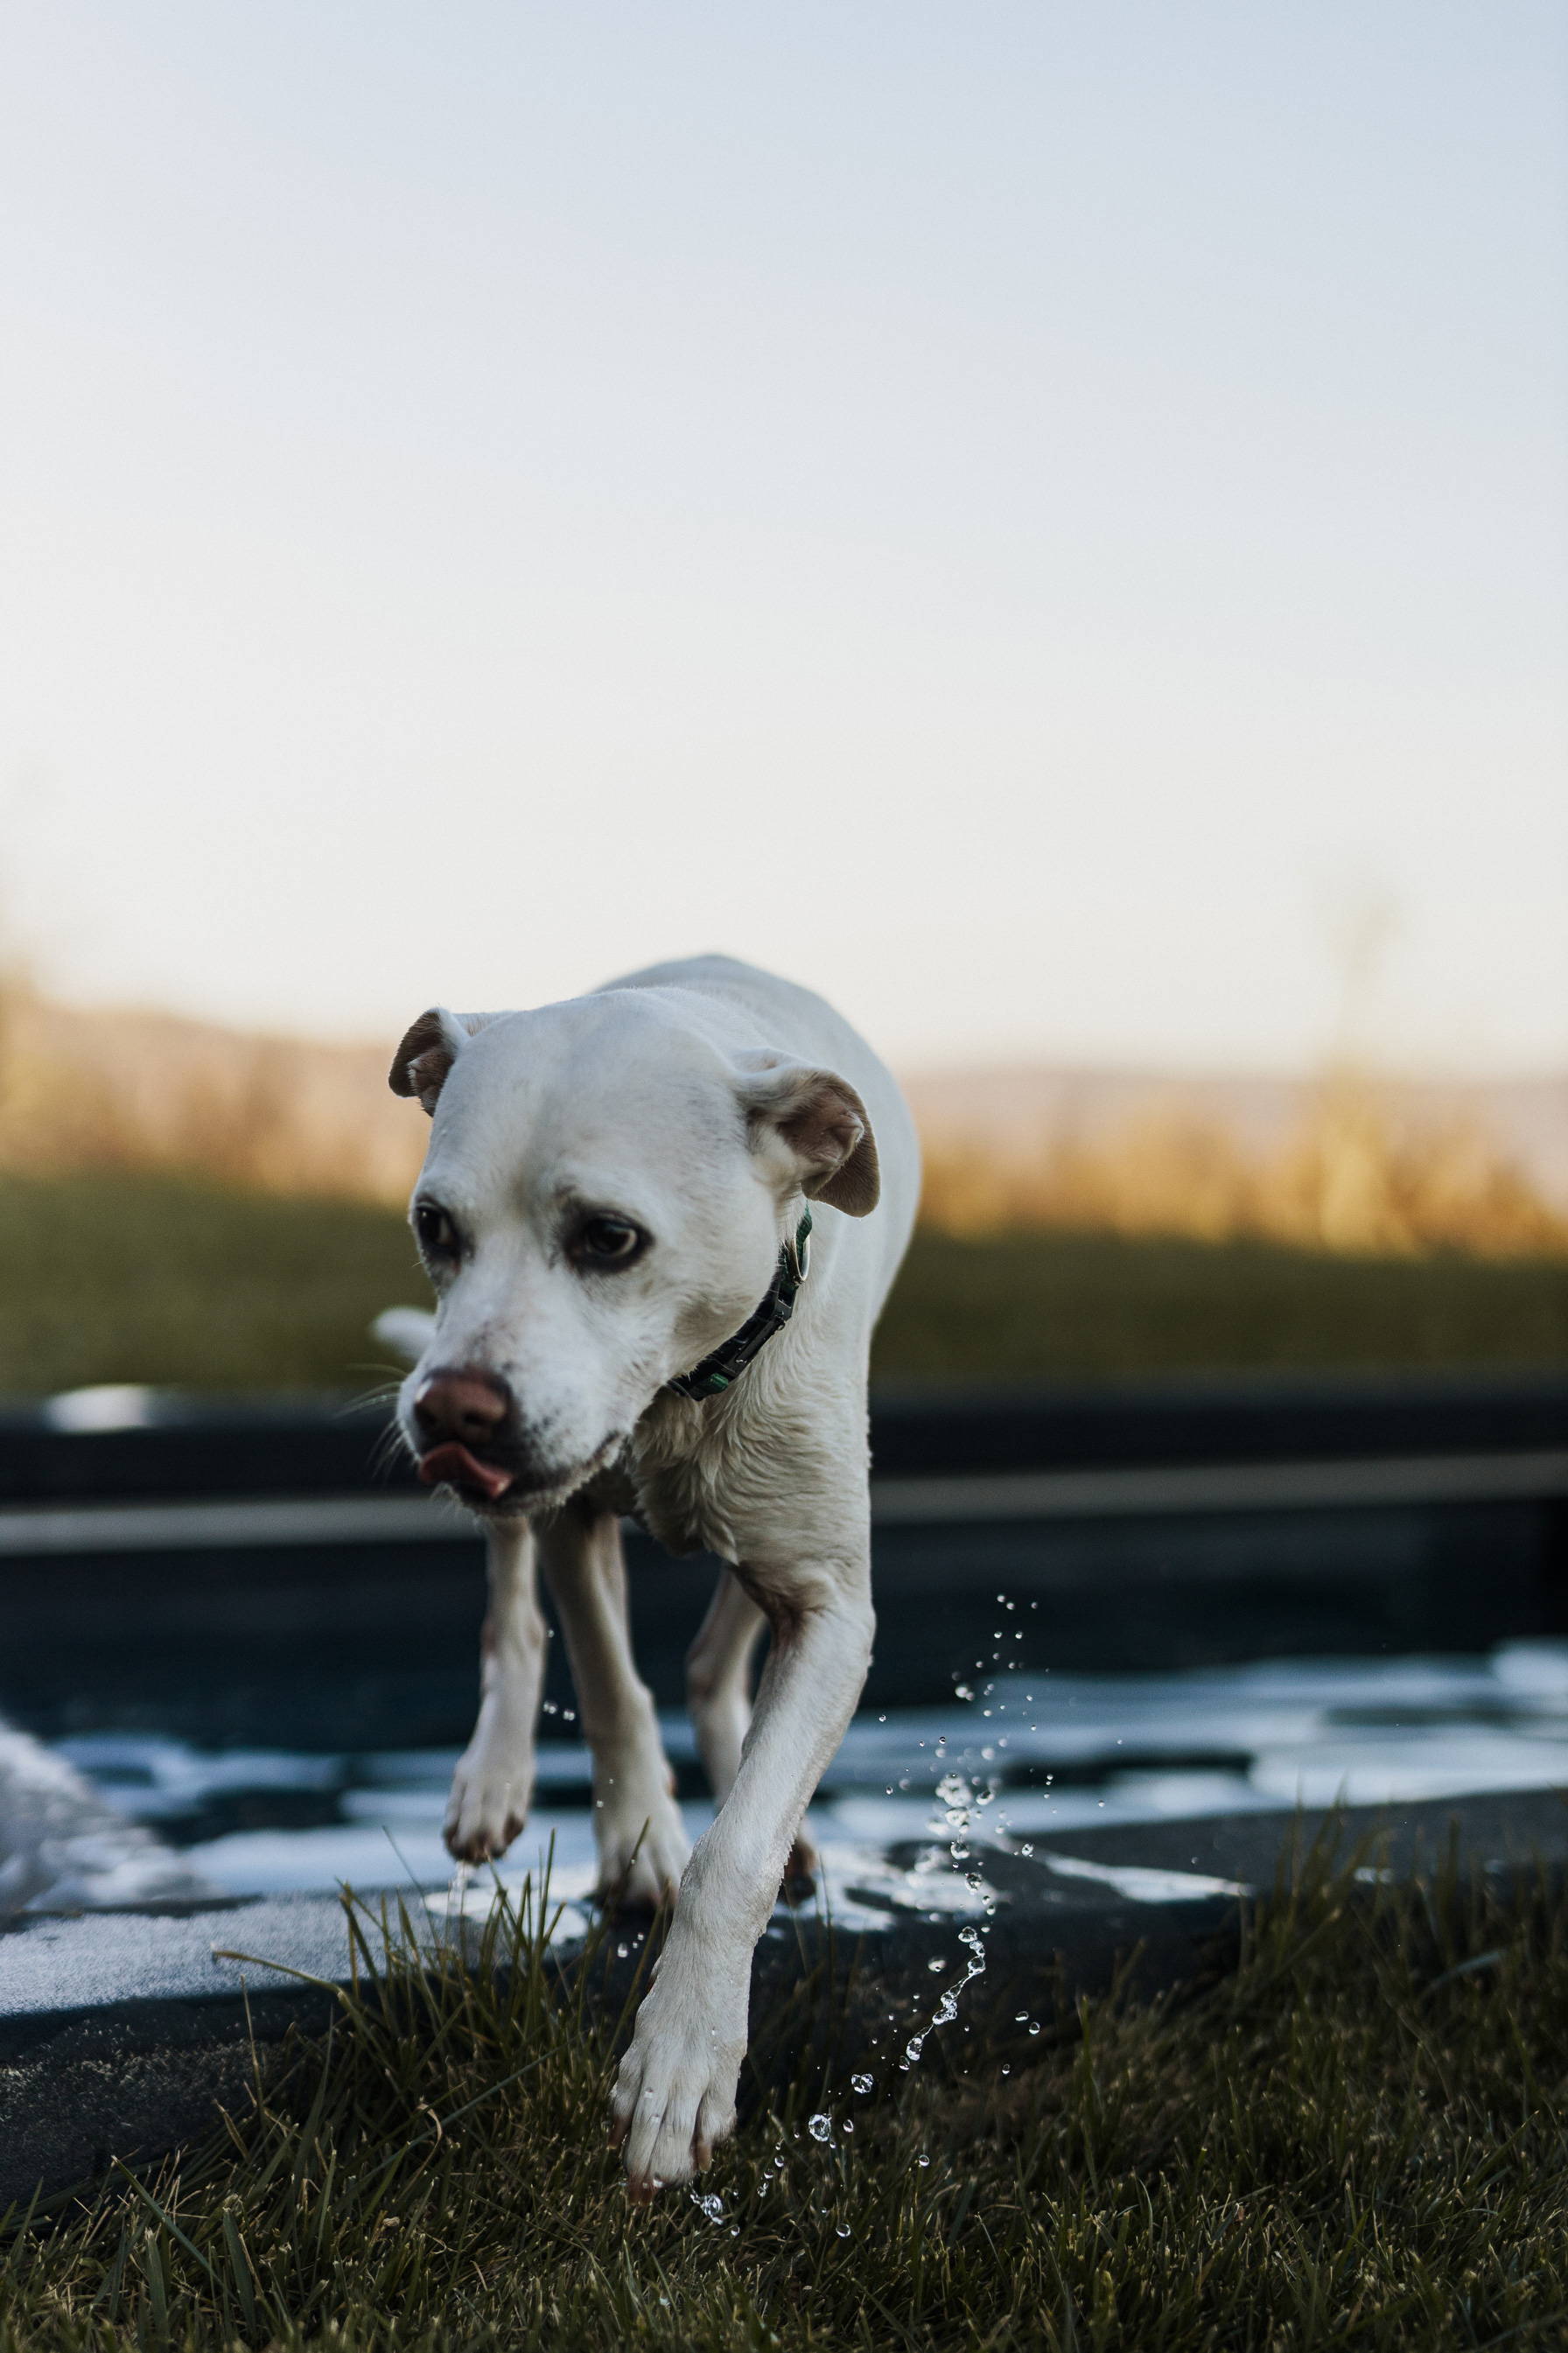 An old dog walking away from a pool with some water dripping out of his mouth.